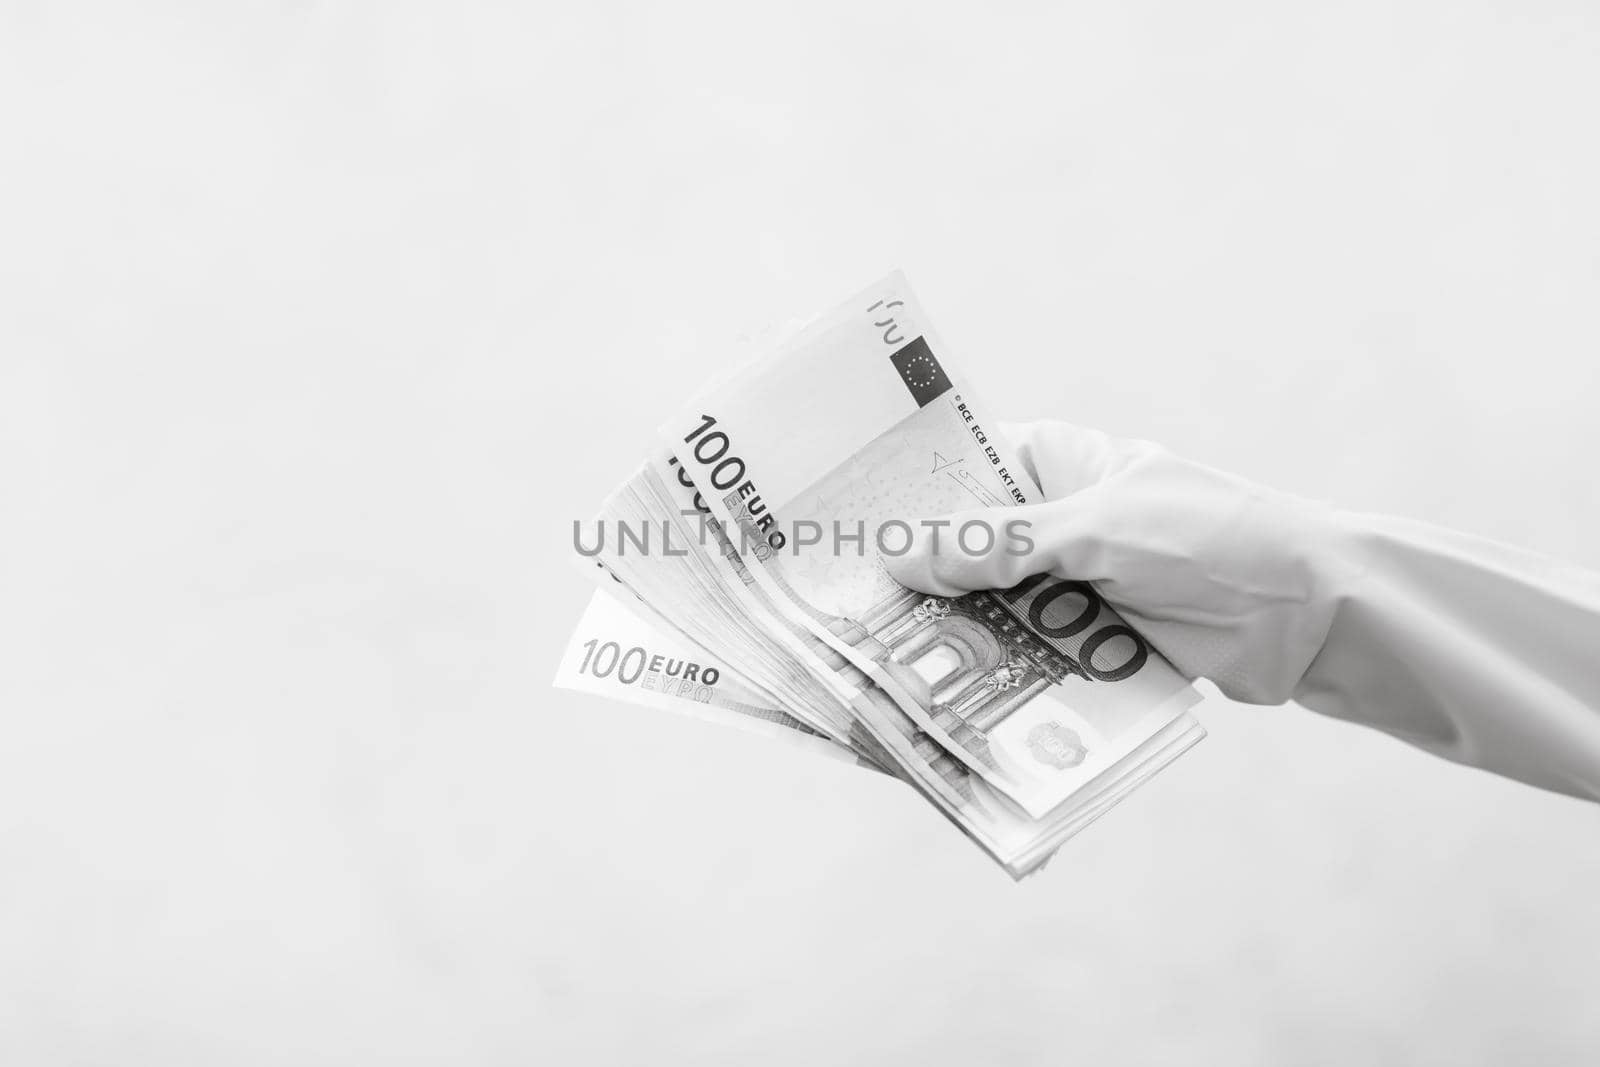 Hand with gloves receiving, giving or holding 100 EURO banknote, isolated on blurred background